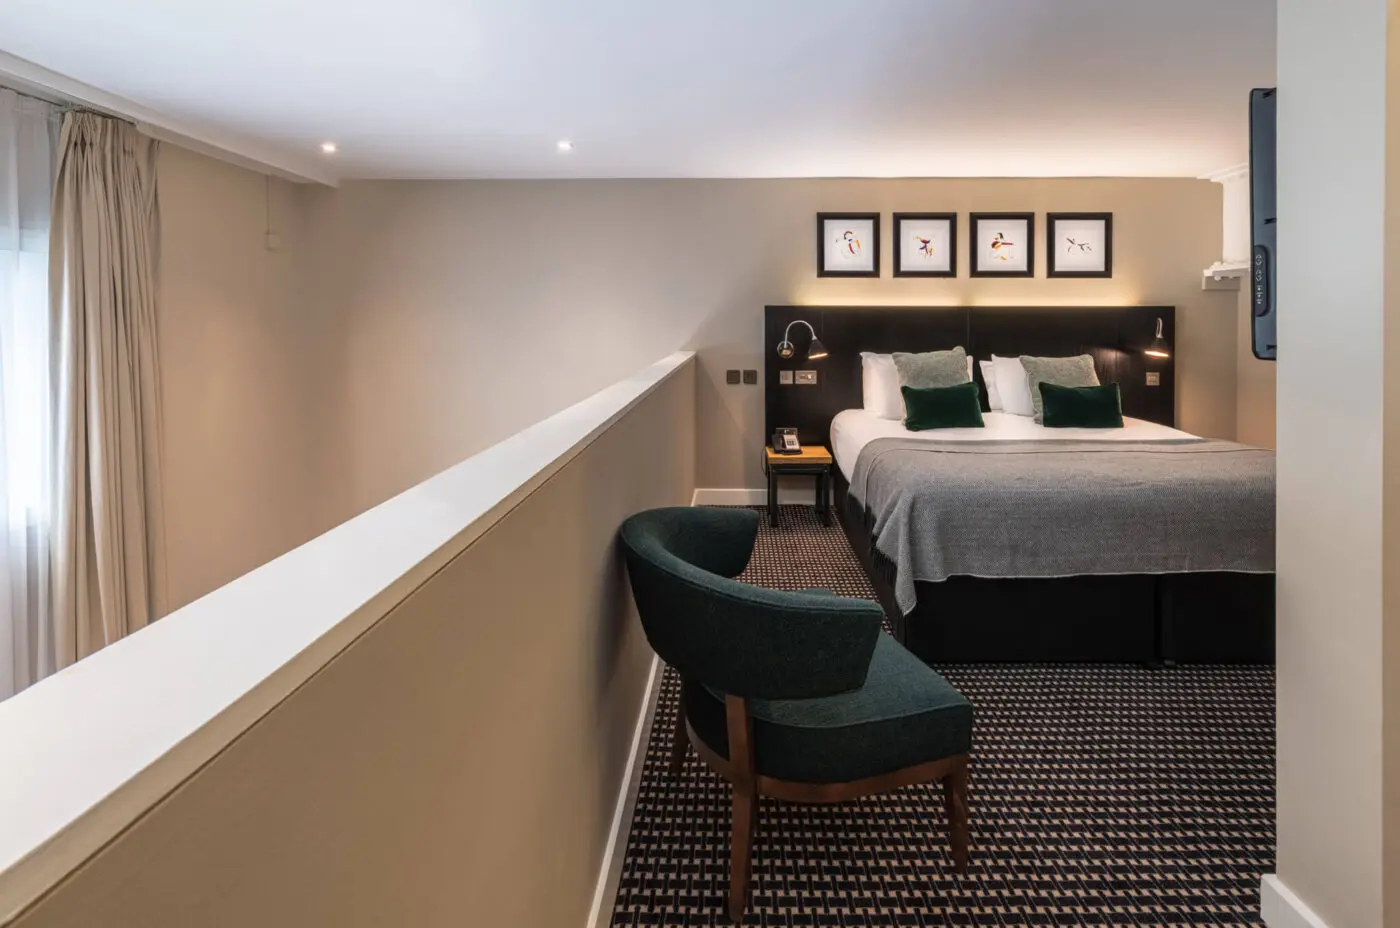 A suite with a double bed, arm chair and bedside table.